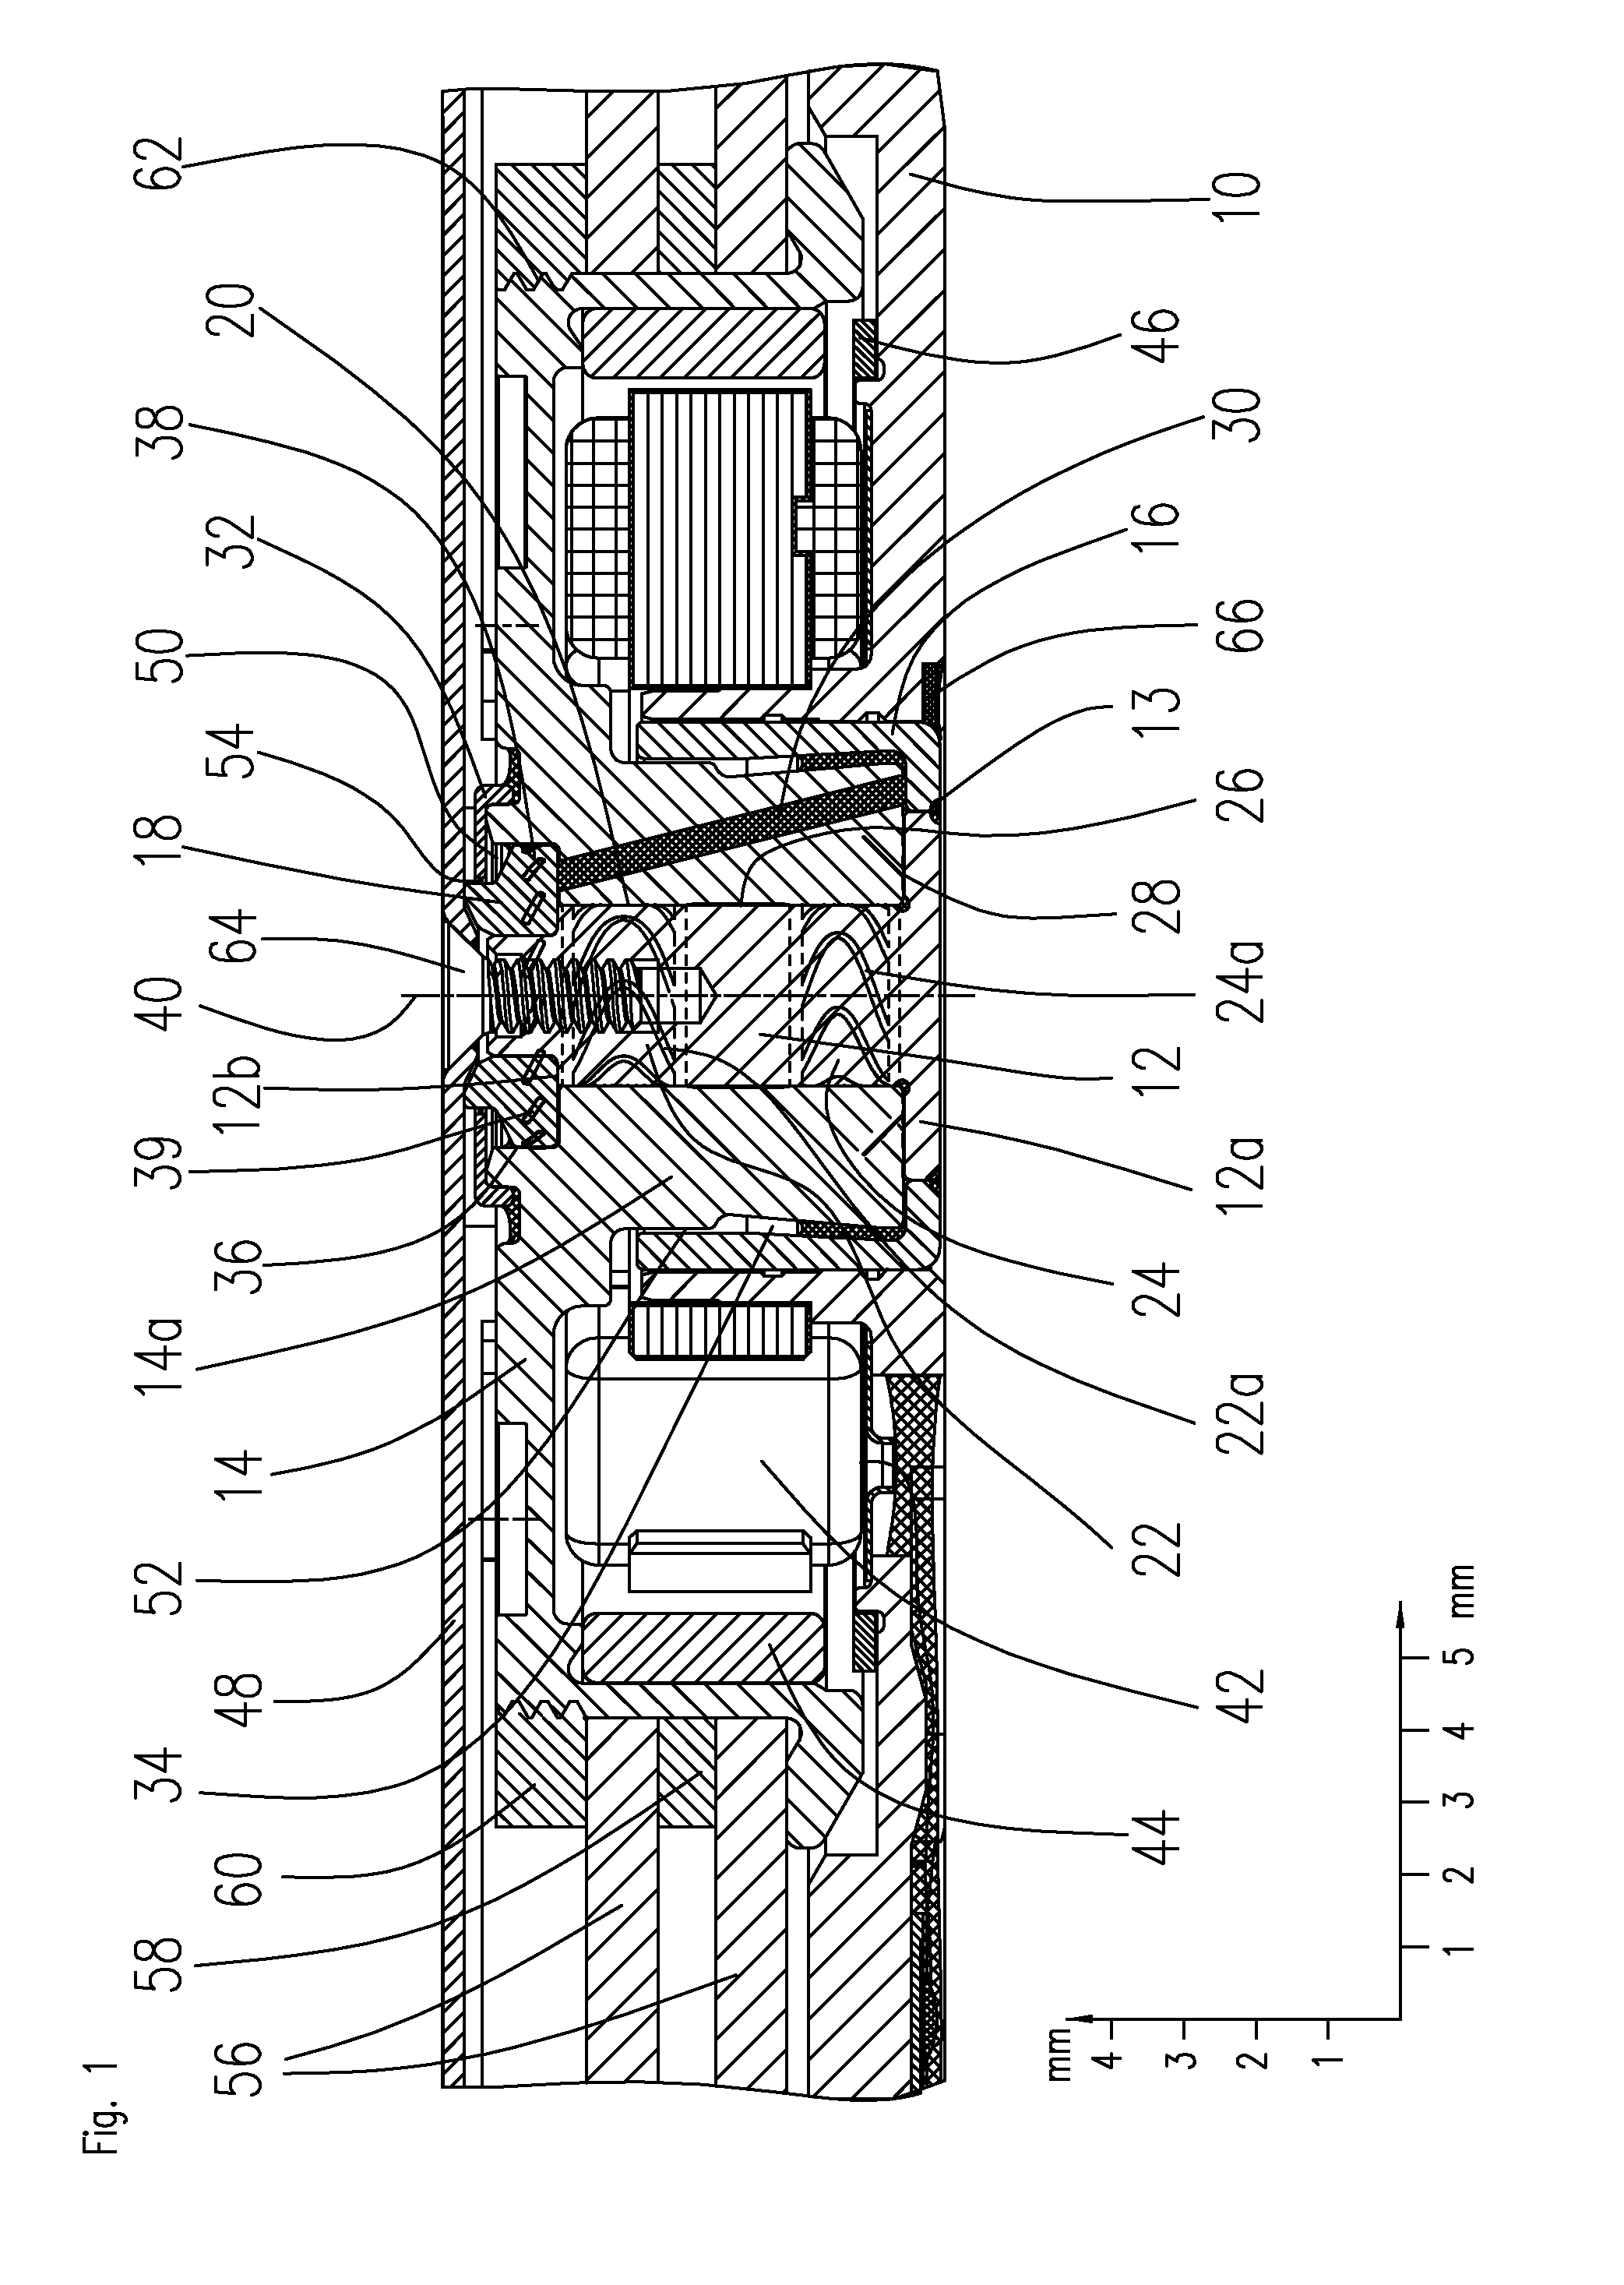 Spindle motor having a low overall height